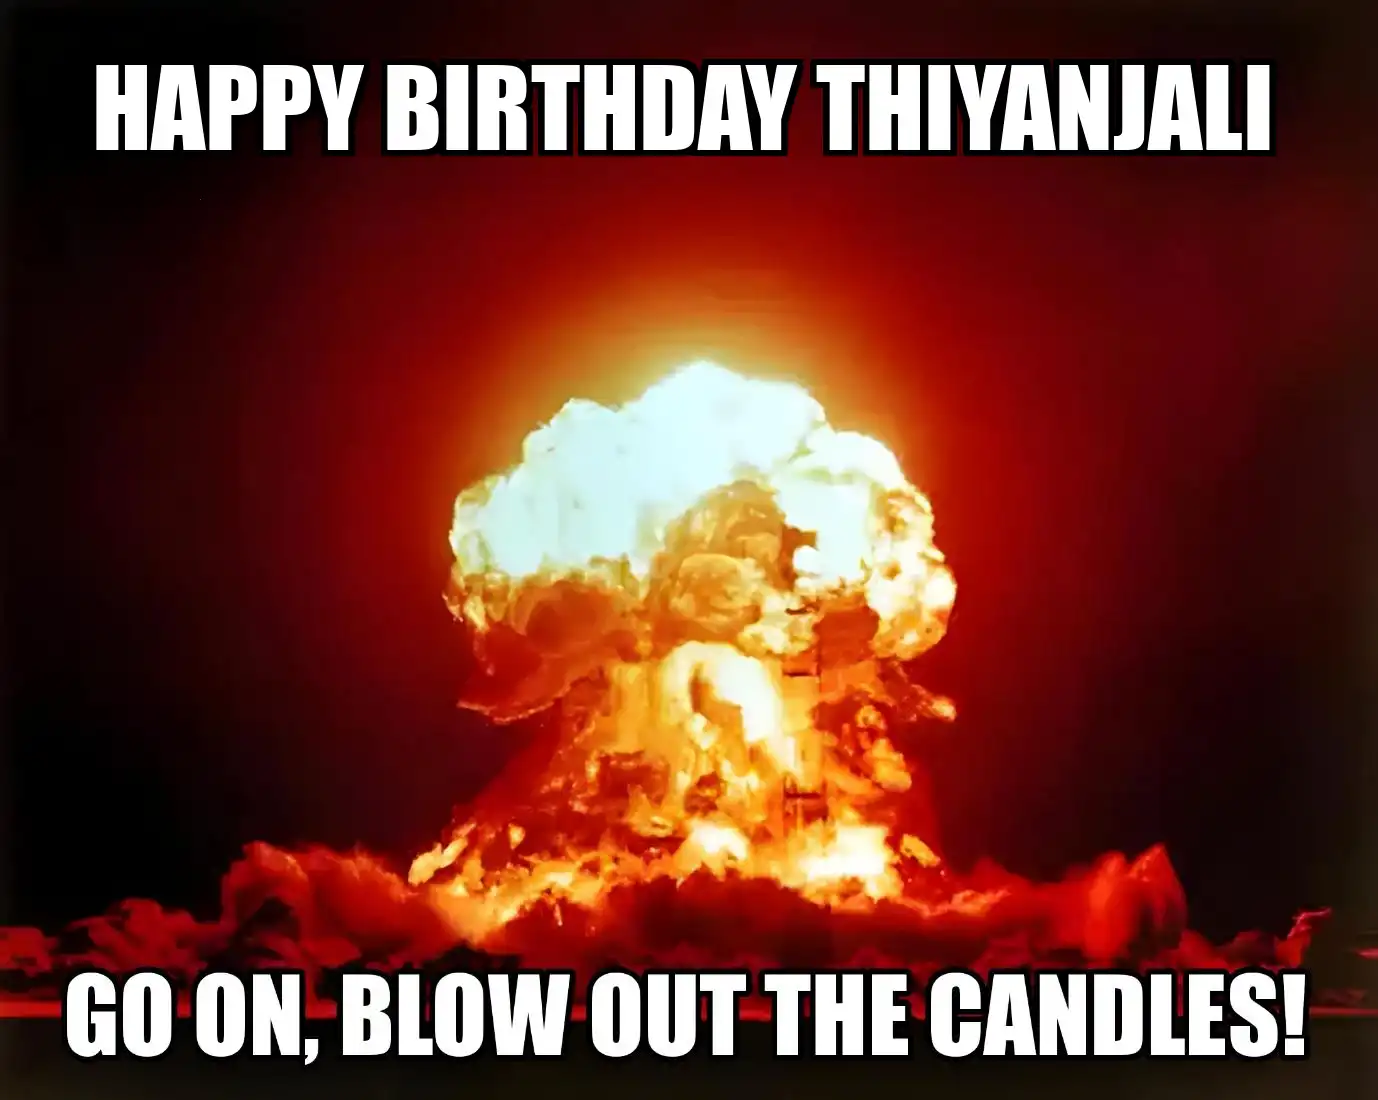 Happy Birthday Thiyanjali Go On Blow Out The Candles Meme